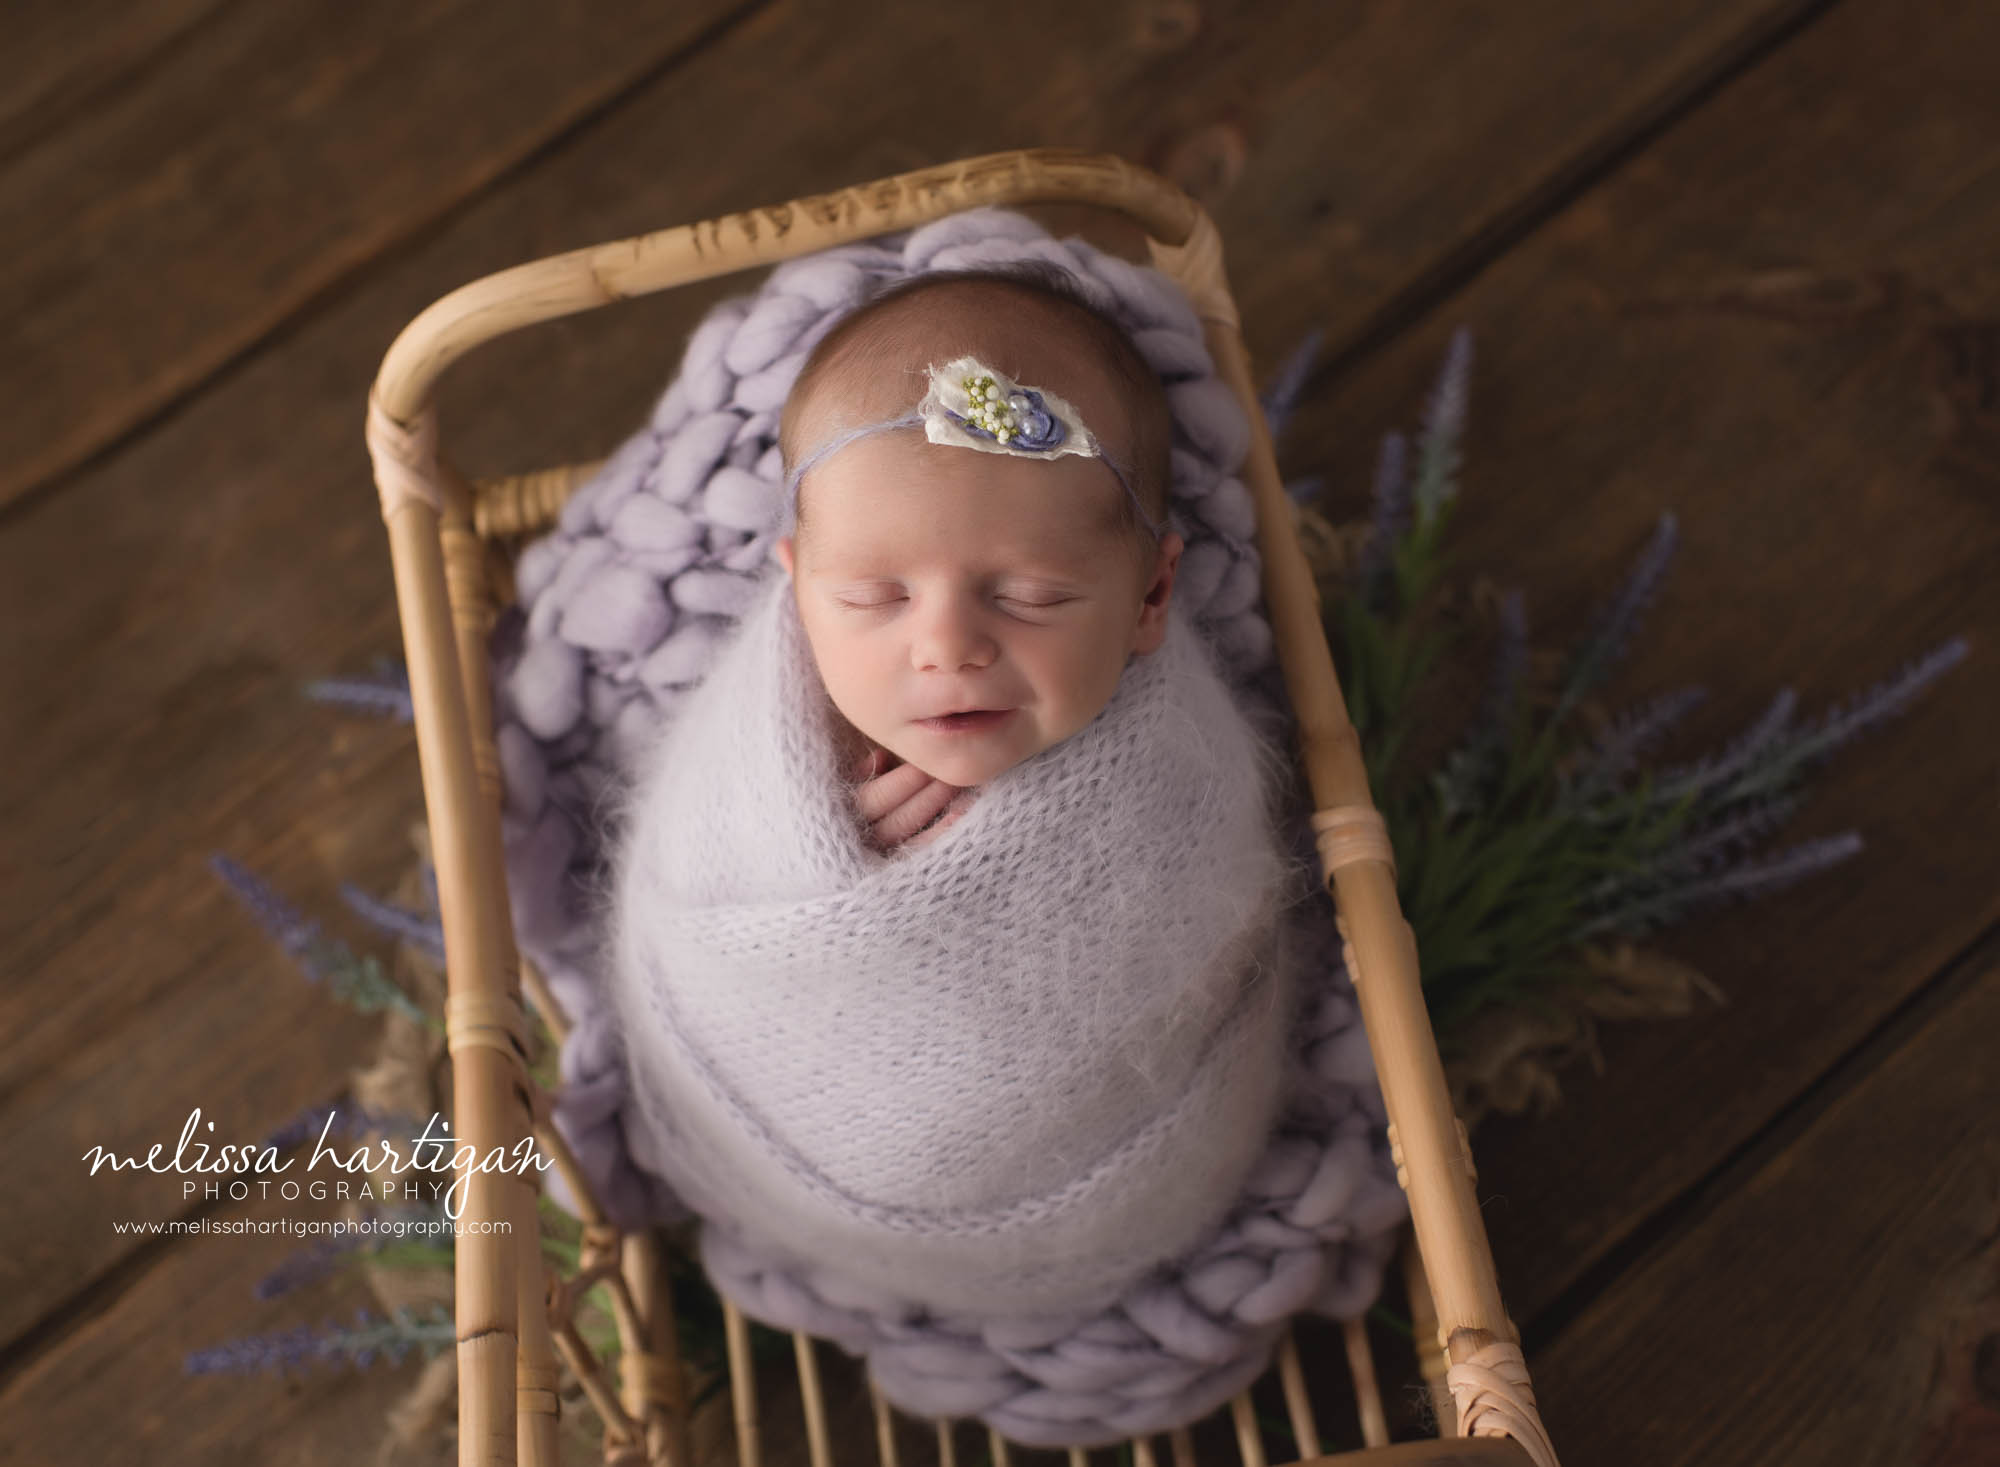 newborn baby girl wrapped in light purple knitted wrap with tieback posed in basket